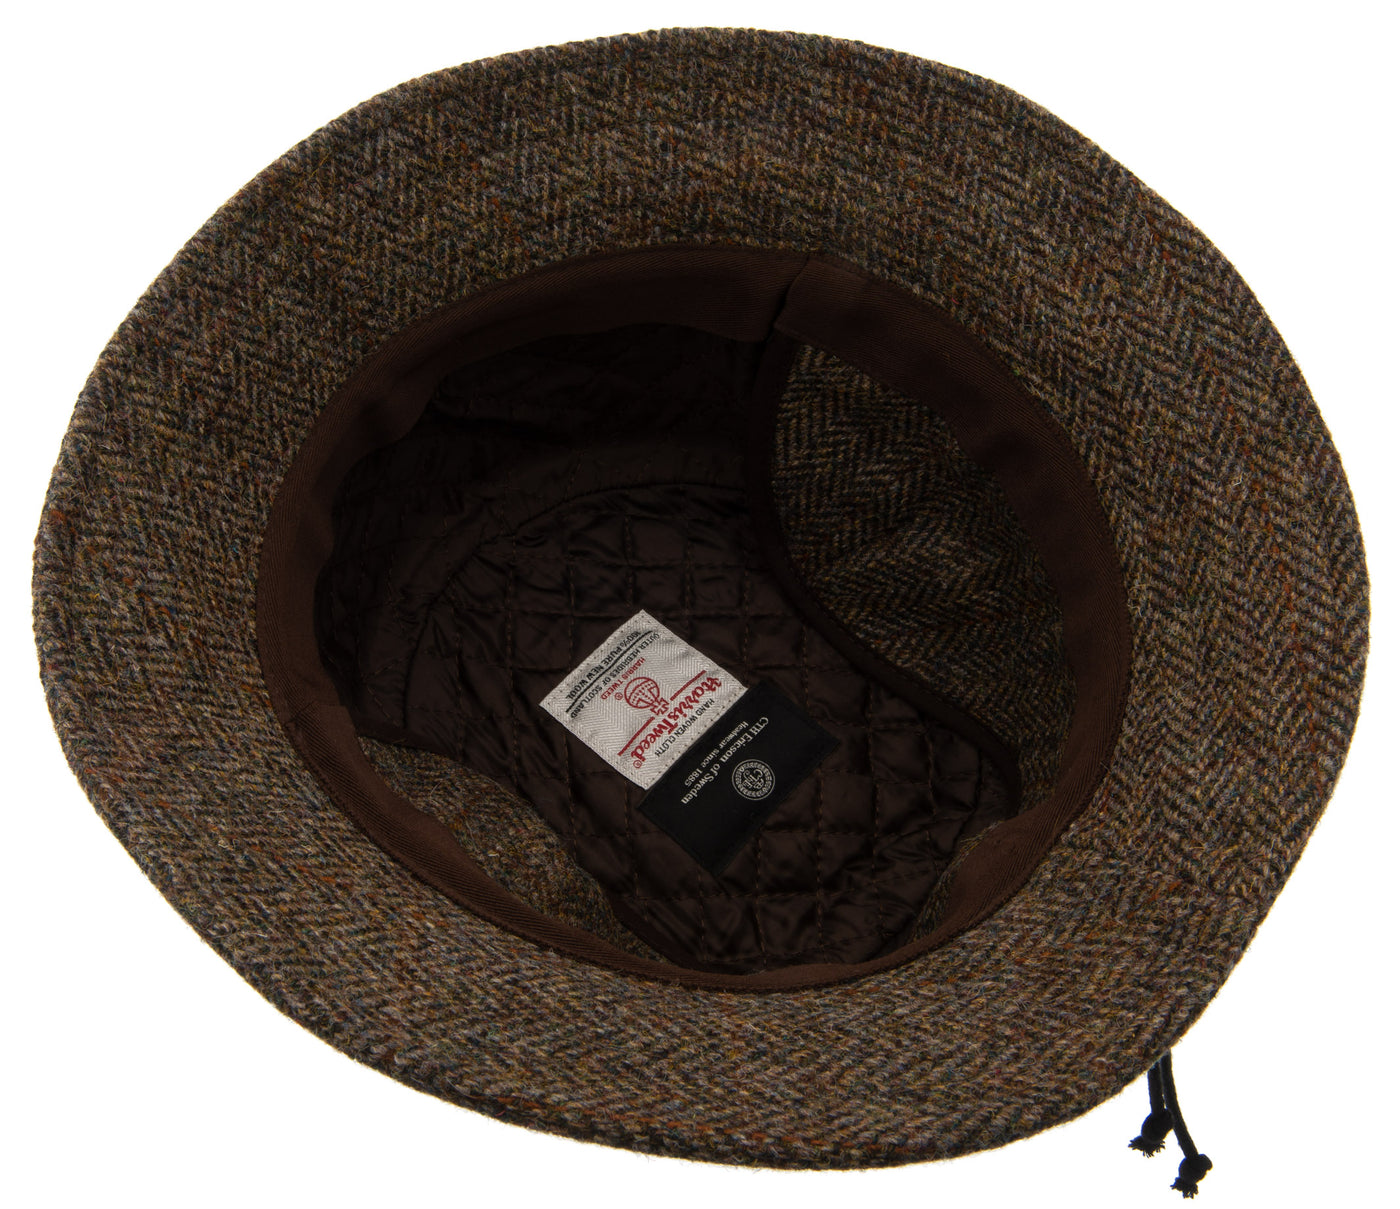 Green Harris Tweed Walking hat, Grouse hat, fold-down ear patches